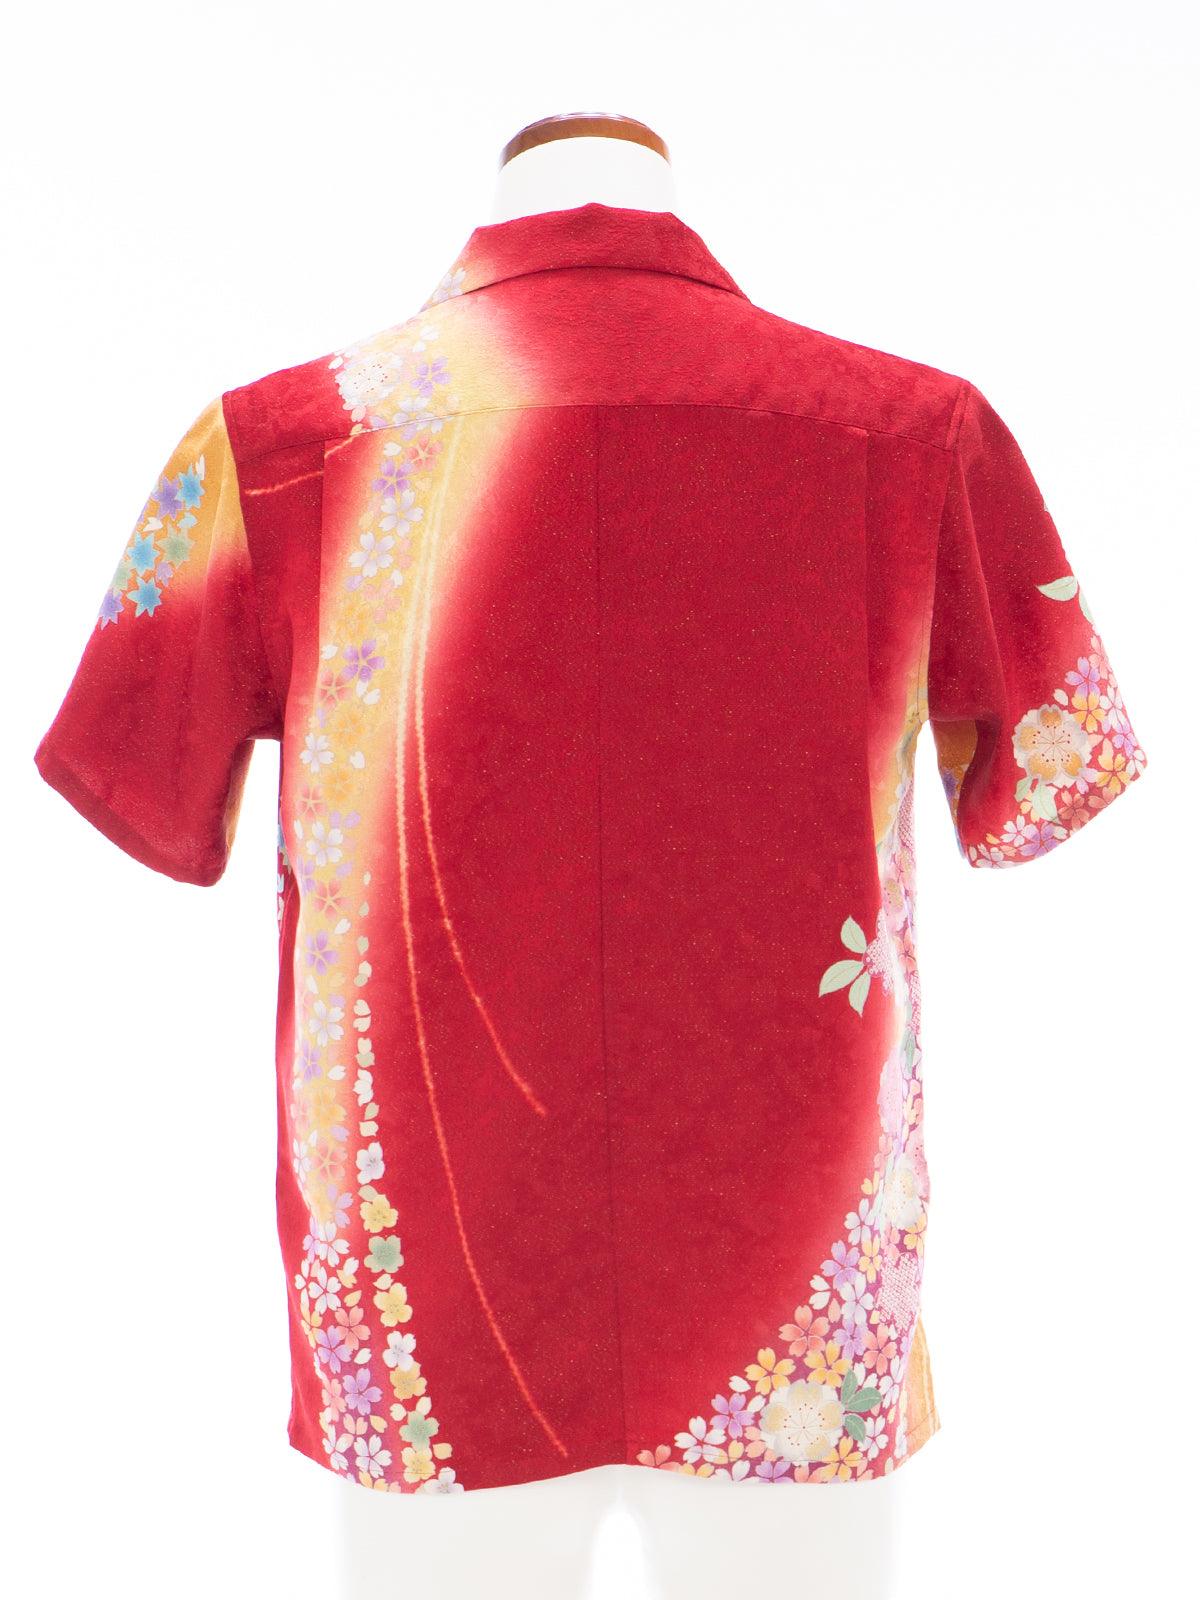 CHEMISE KIMONO ALOHA 'FLOWING FLOWERS IN RED A' AH100159 - CHEMISE KIMONO ALOHA BOUTIQUE SPÉCIALISÉE